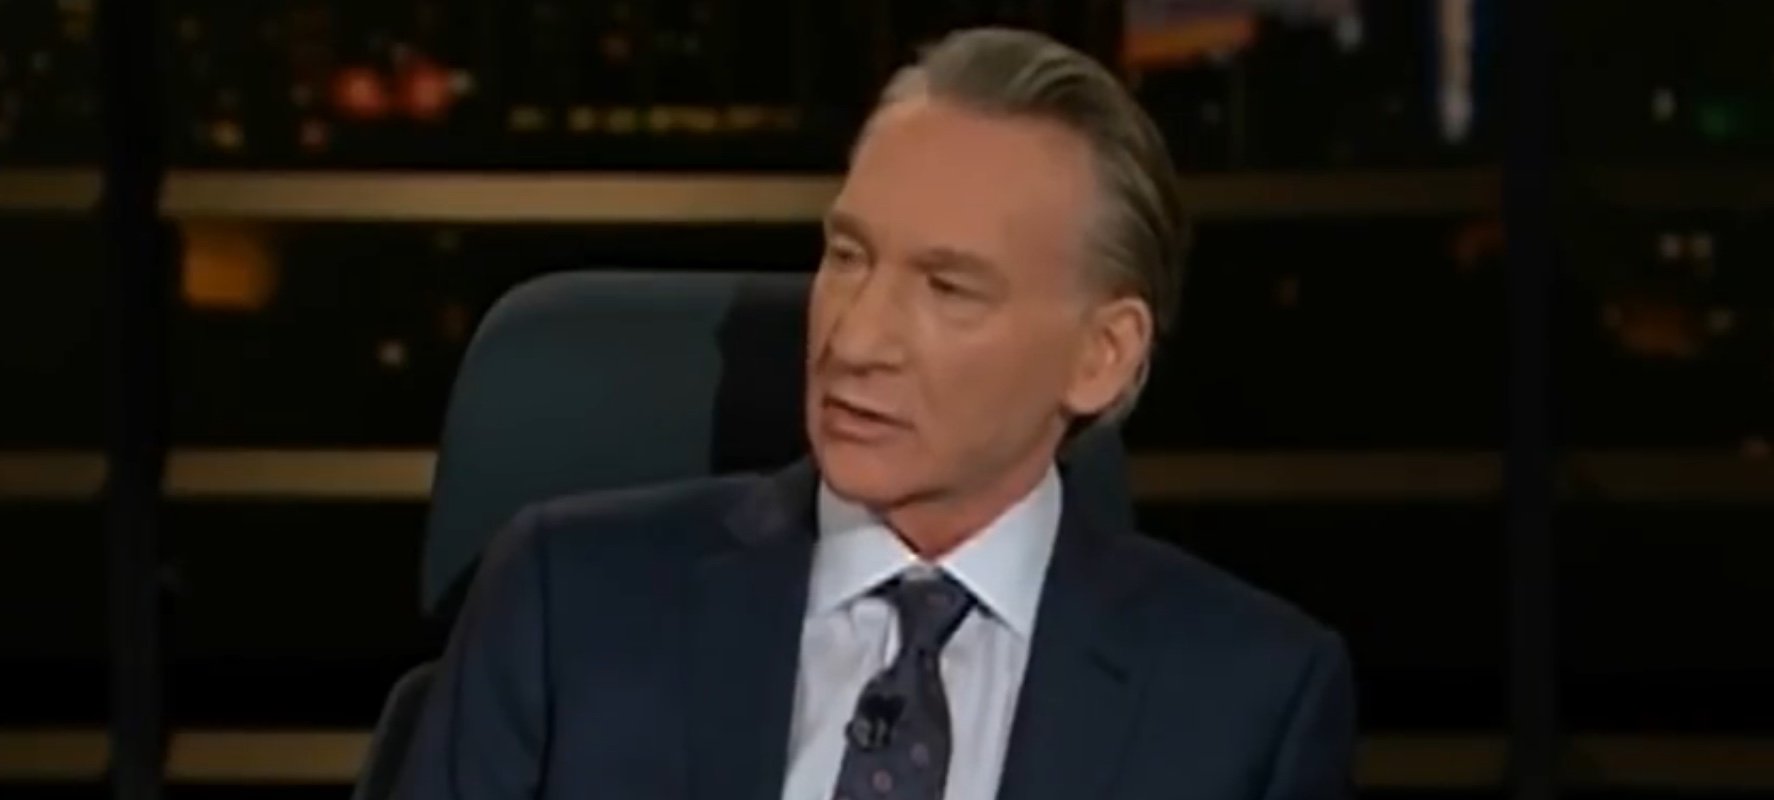 Bill Maher appears on his HBO Cable Show “Real Time with Bill Maher,” Oct. 26, 2018. YouTube screenshot.